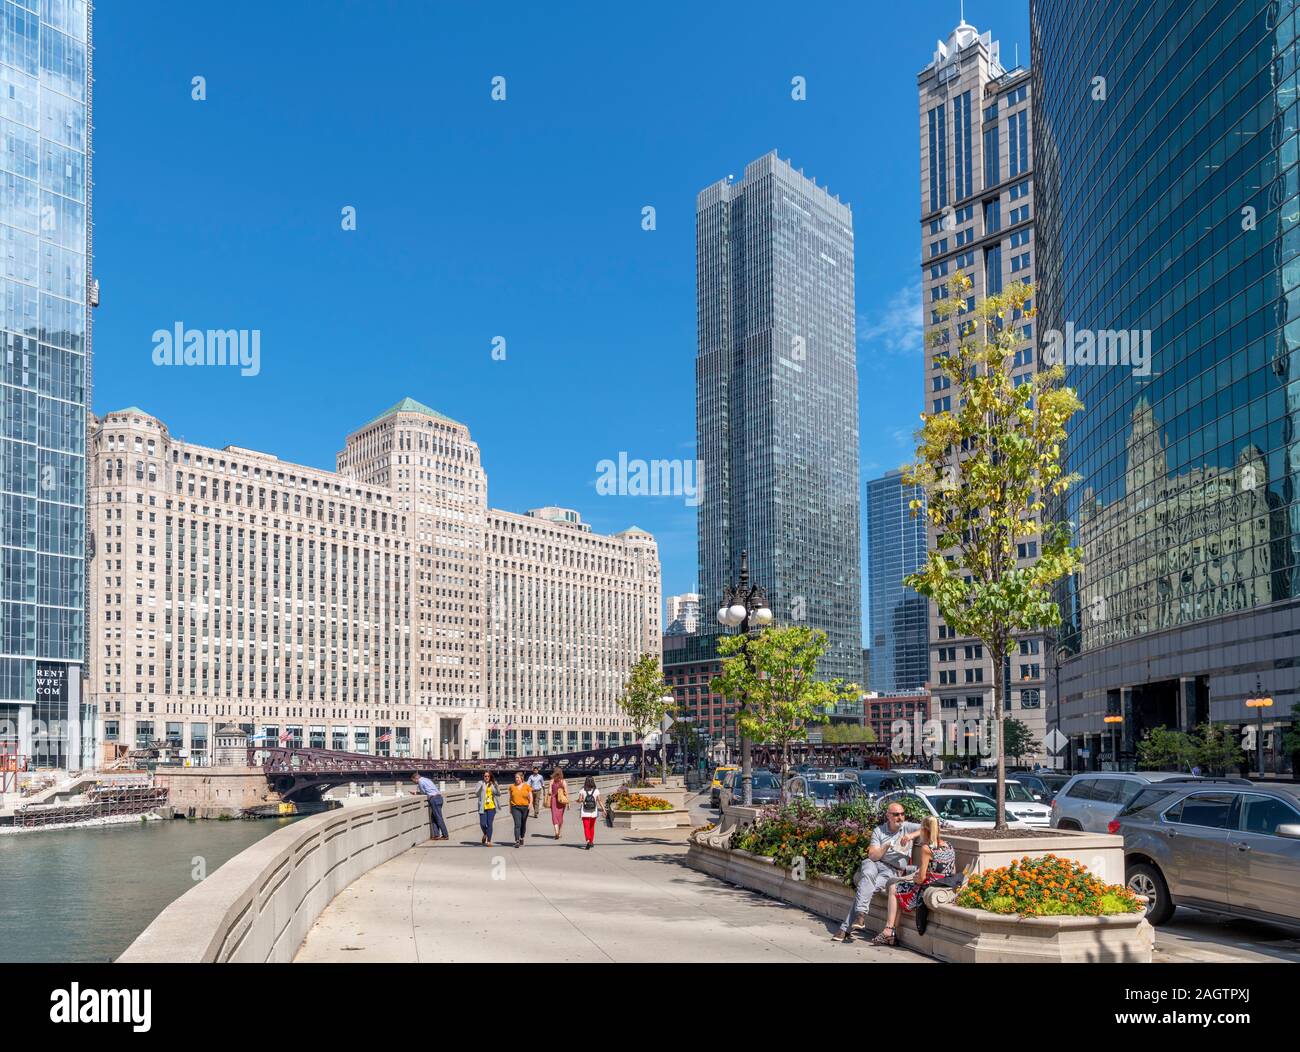 Chicago, Art Deco. W Wacker Drive alongside the Chicago River looking towards the Merchandise Mart building, Chicago, Illinois, USA Stock Photo